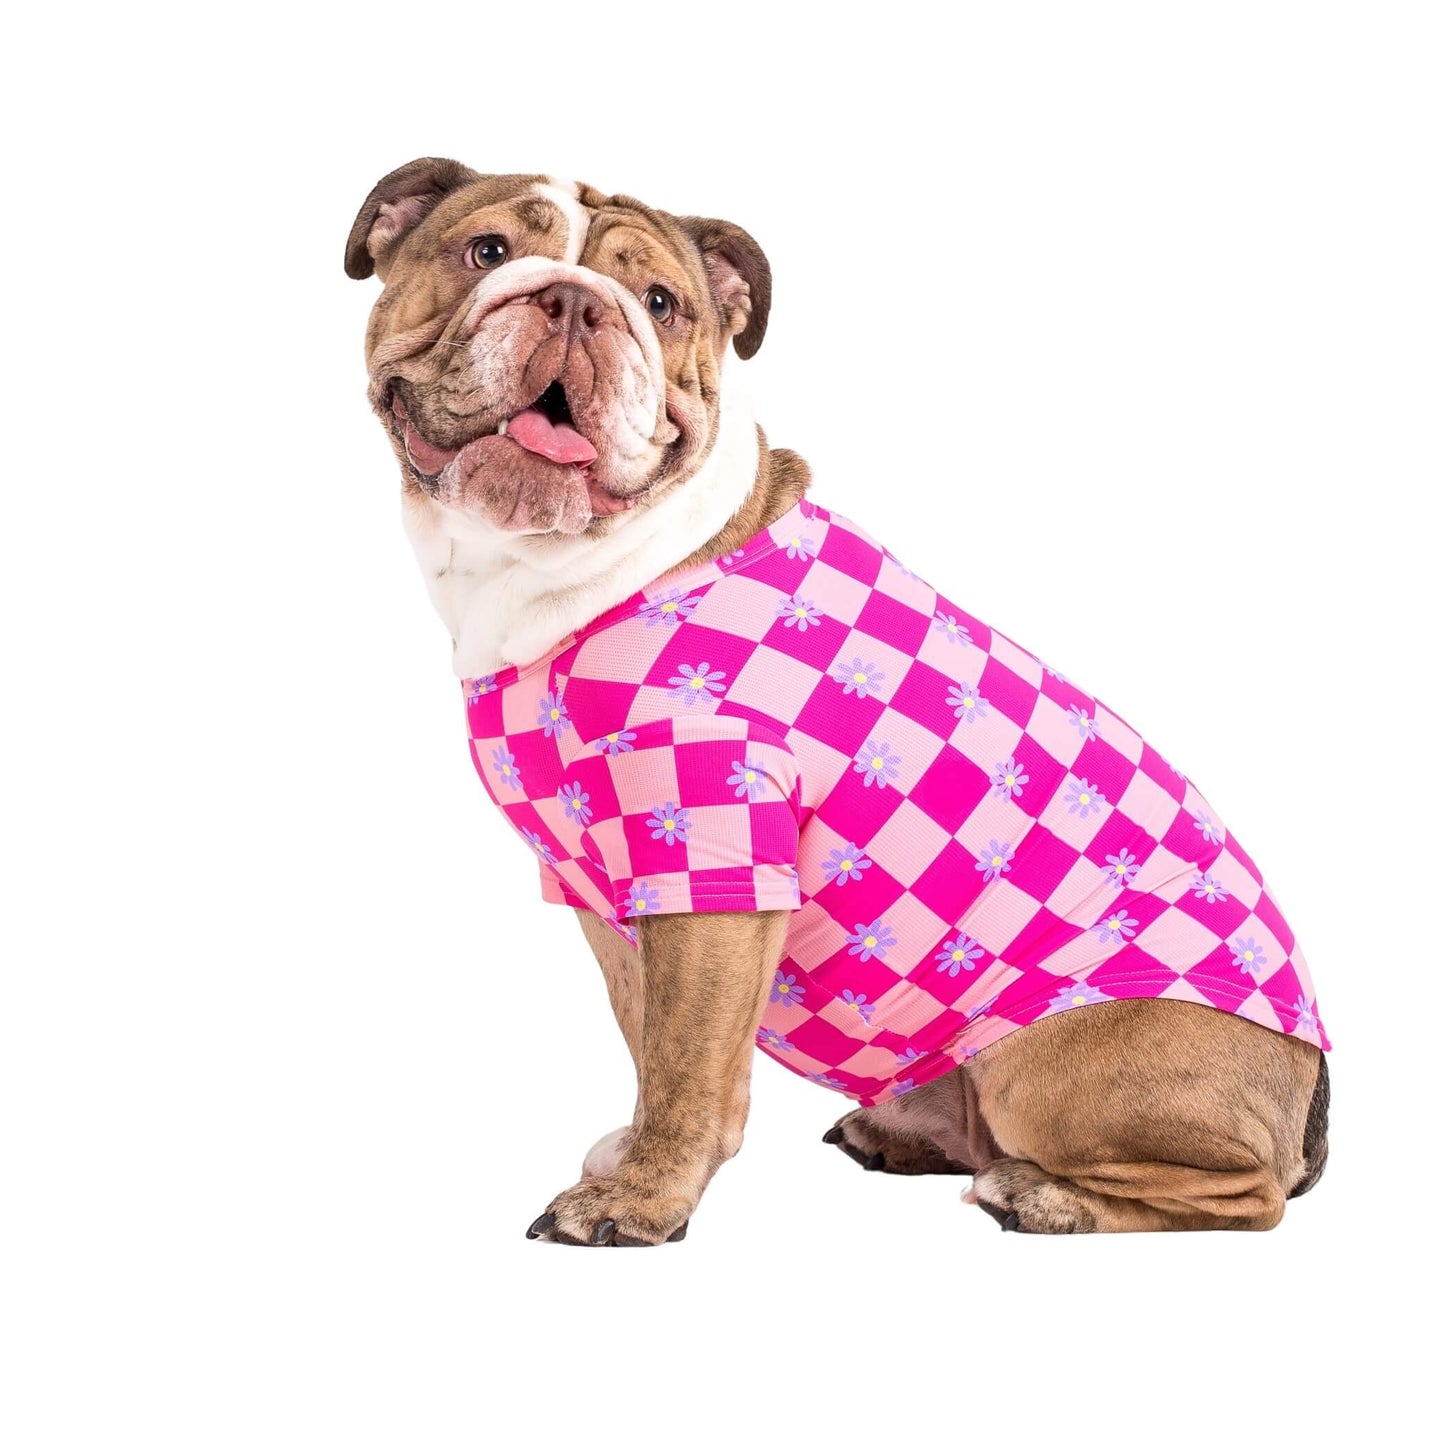 Englishj Bulldog wearing Vibrant Hounds Crazy Daisy cooling shirt for dogs. It is pink chequered with daisys printed on it.